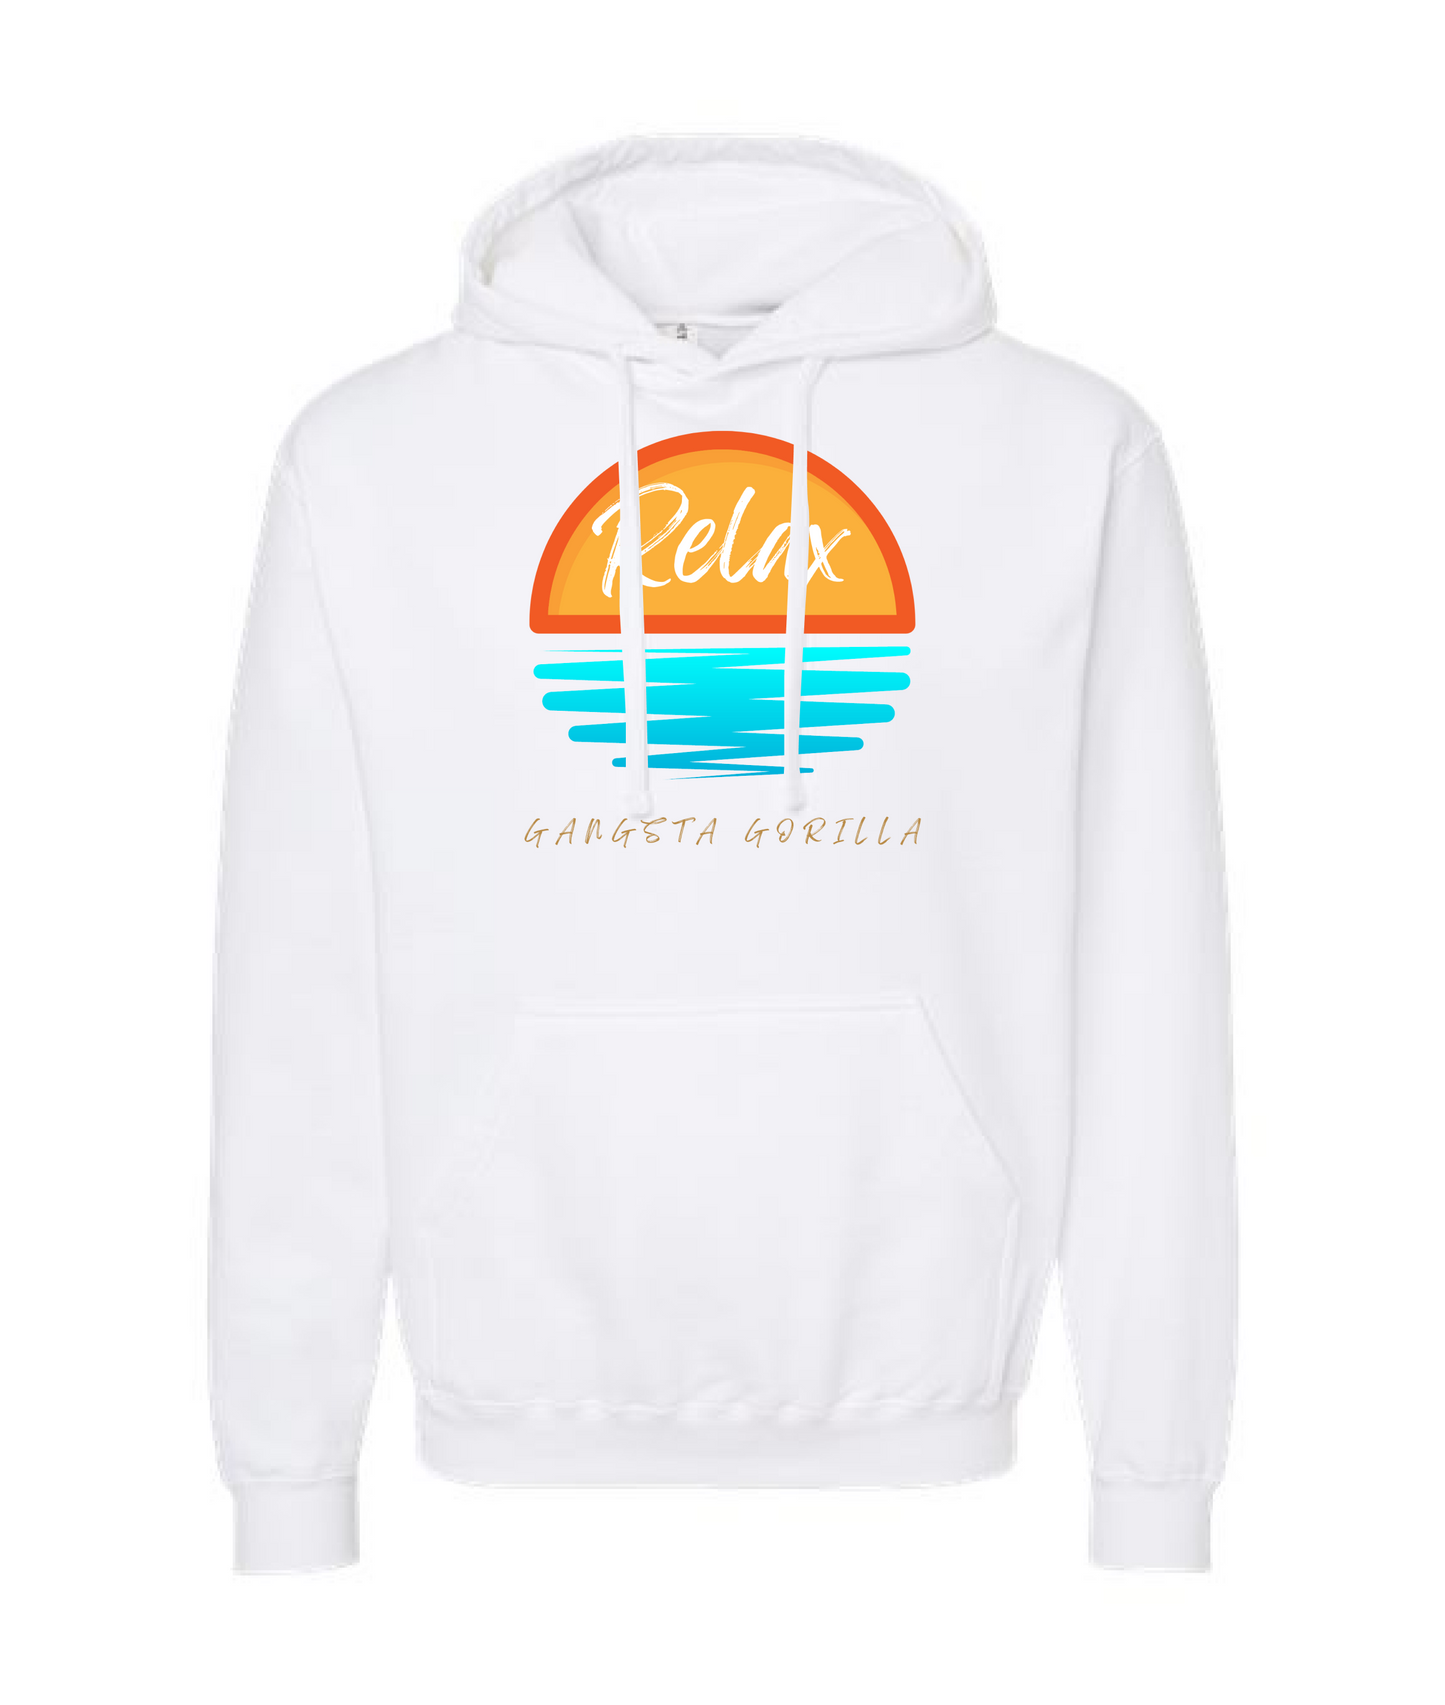 Gangsta Gorilla Extracts and Apparel - RELAX - White Hoodie